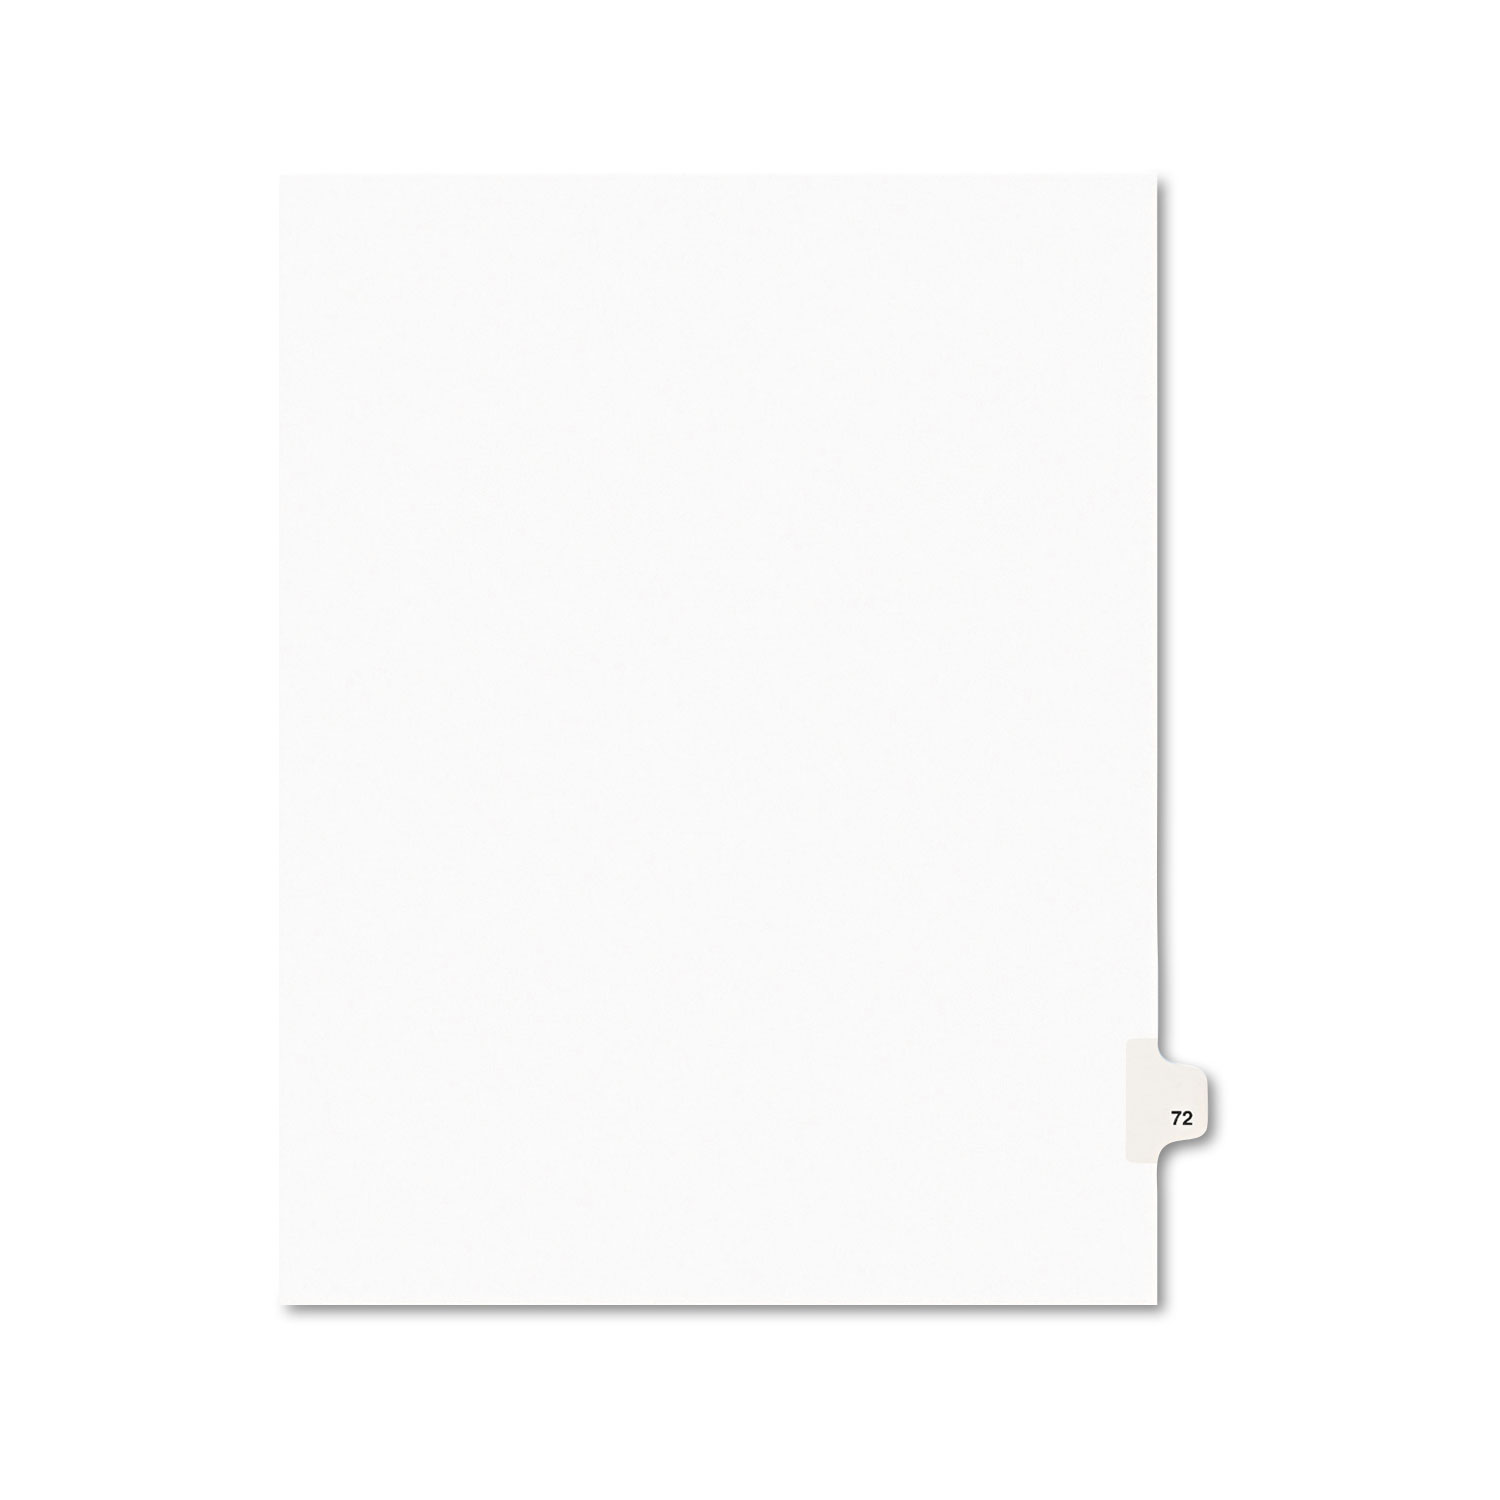  Avery 01072 Preprinted Legal Exhibit Side Tab Index Dividers, Avery Style, 10-Tab, 72, 11 x 8.5, White, 25/Pack (AVE01072) 